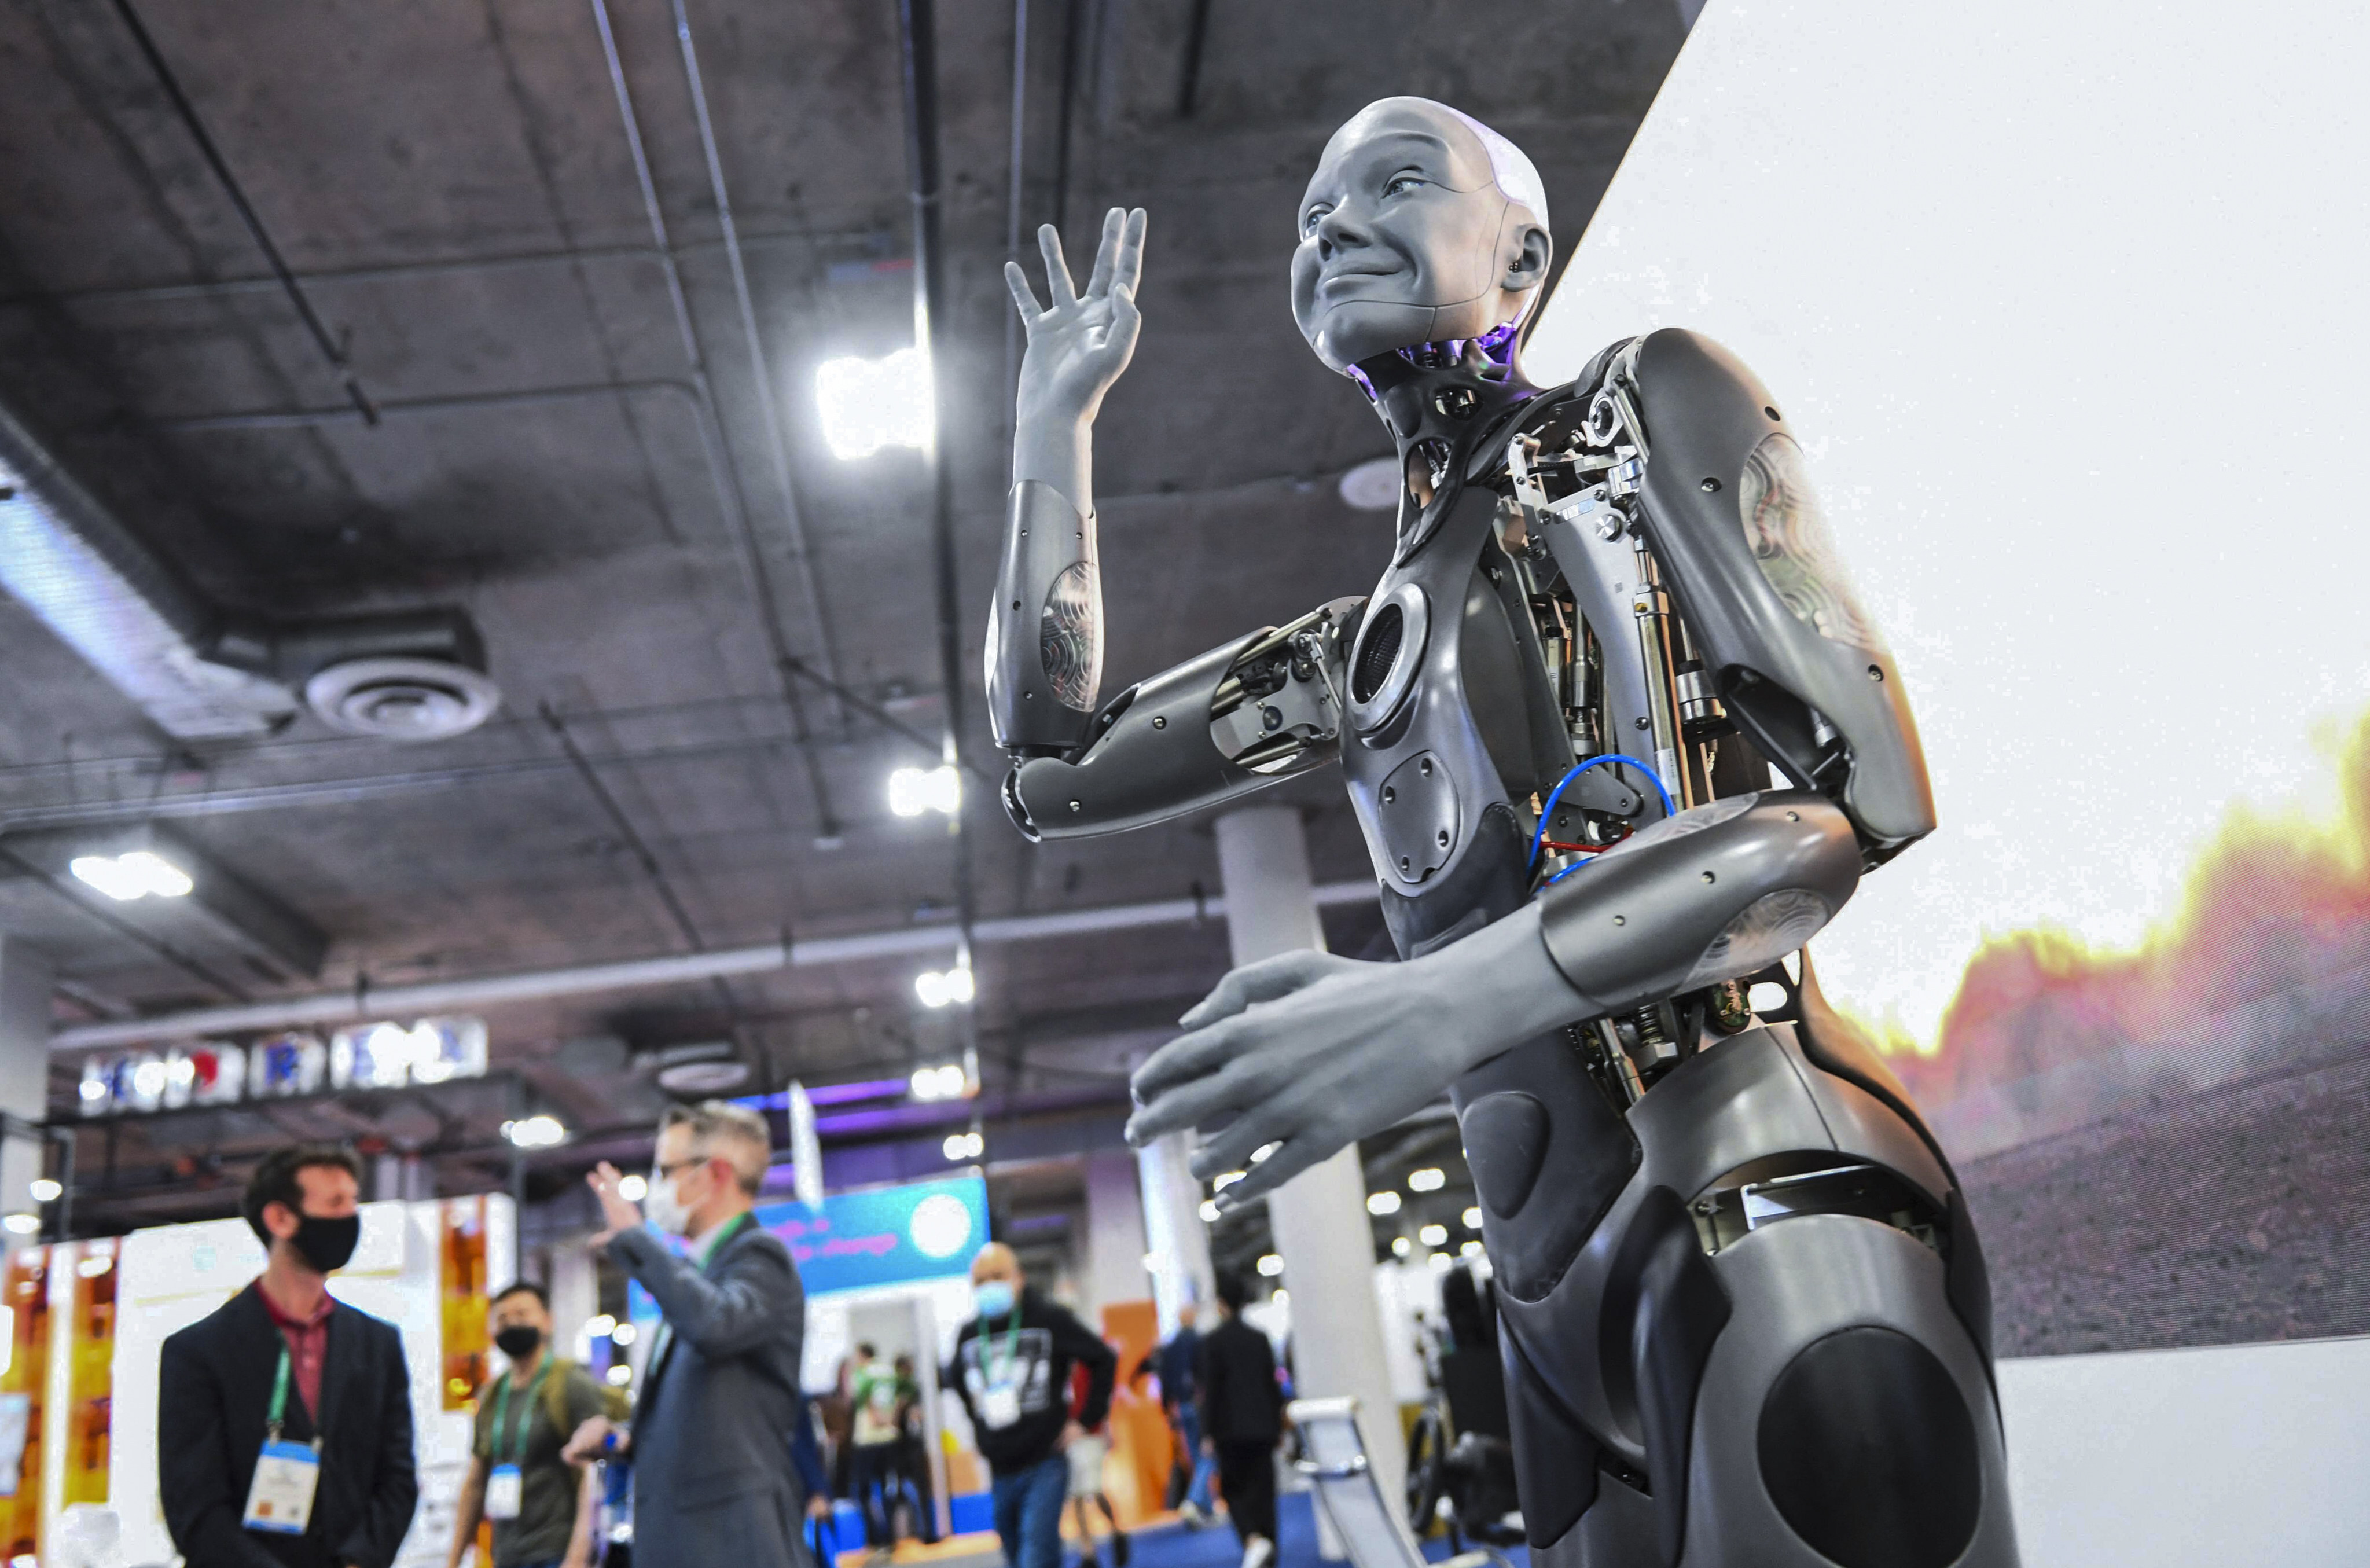 The Engineered Arts Ameca humanoid robot gestures during the Consumer Electronics Show on January 5 in Las Vegas, Nevada. Governance and ethics around AI are coming under increasing scrutiny as firms continue to embrace the emerging technology. Photo: AFP